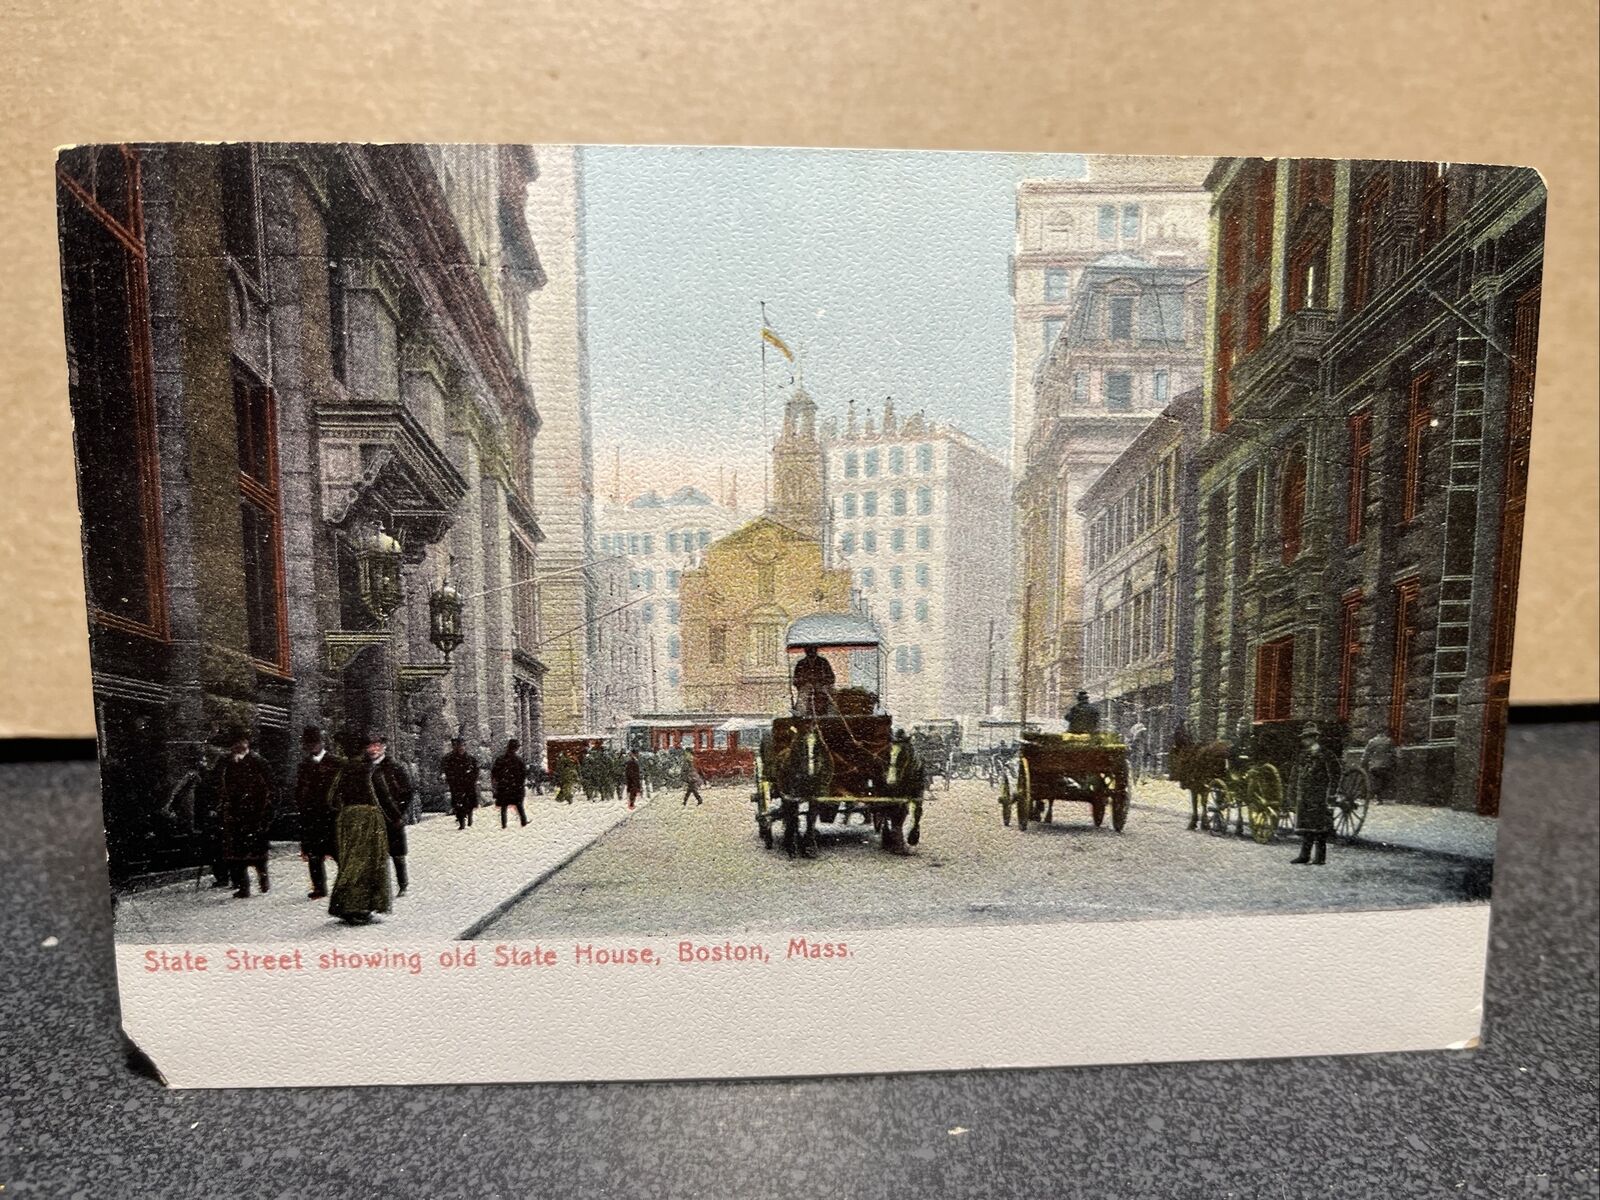 State Street Showing Old State House, Boston, Massachusetts Postcard